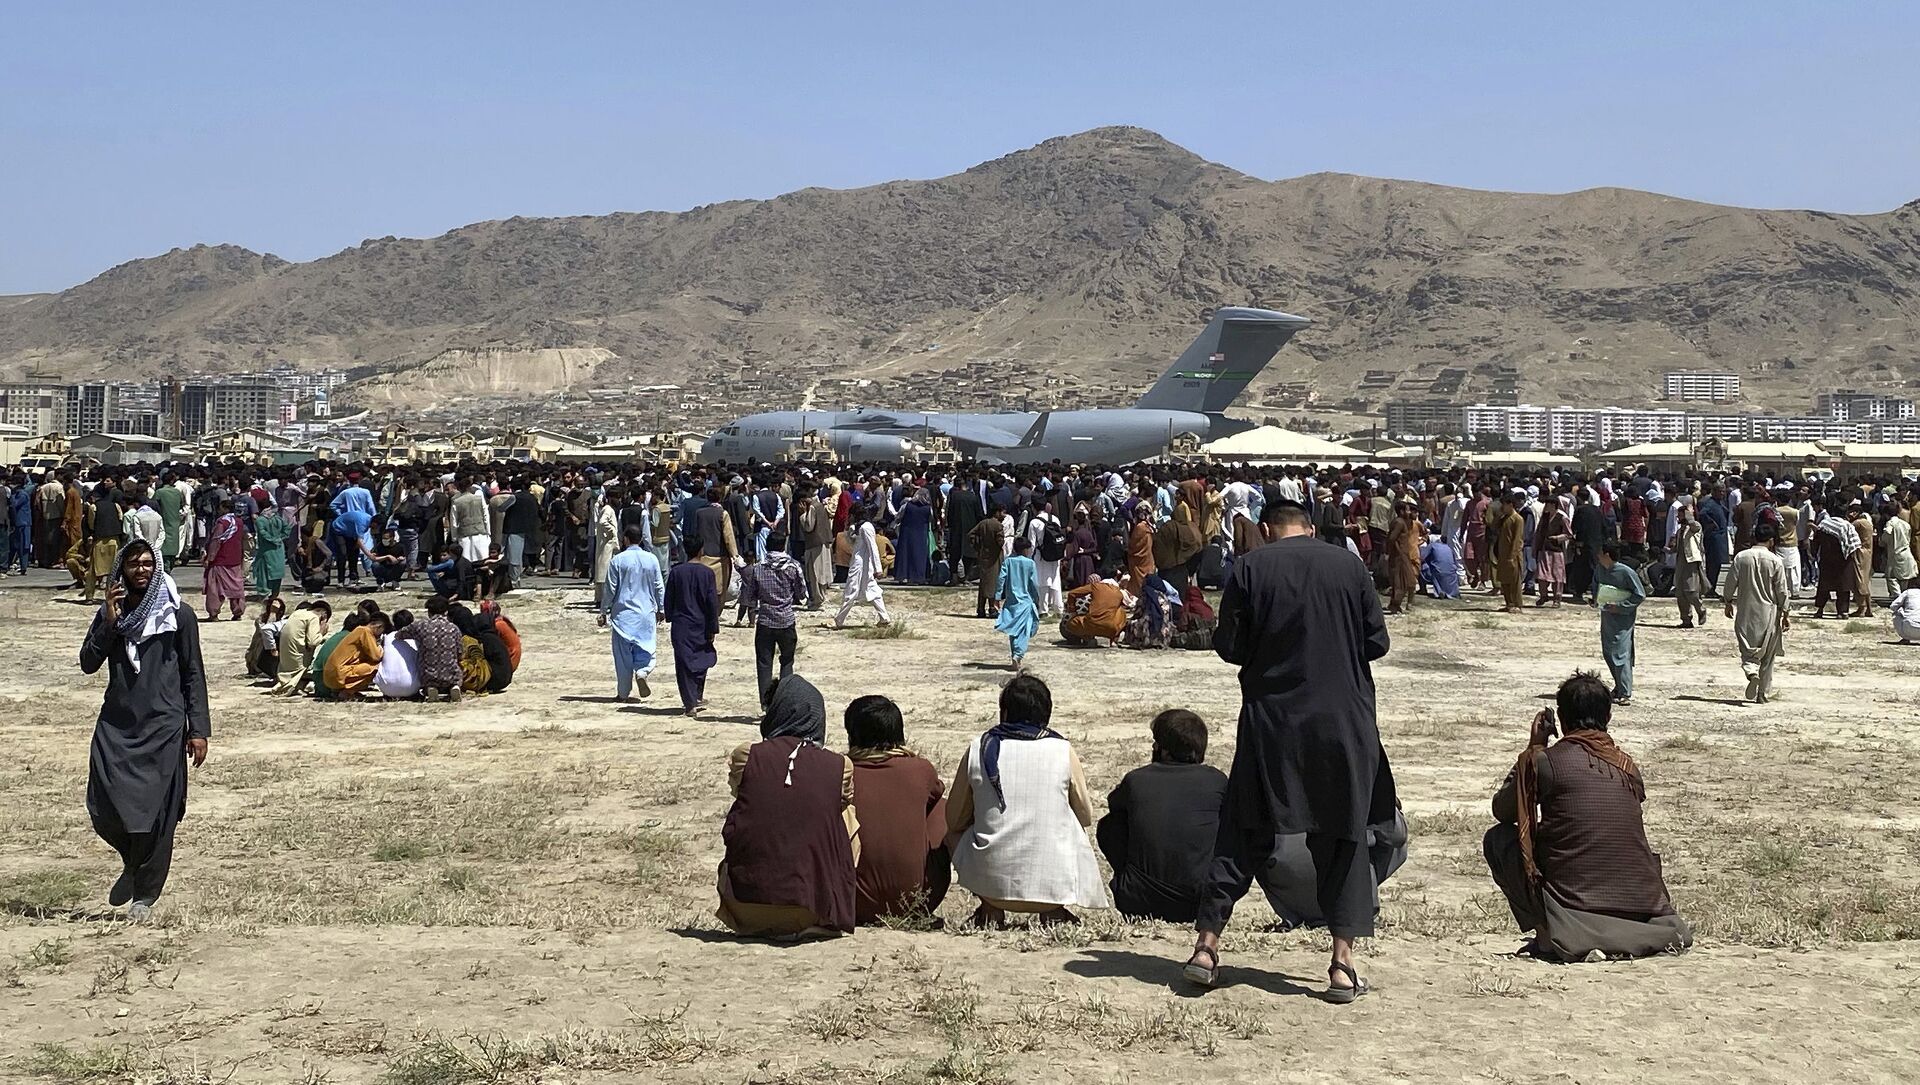 Hundreds of people gather near a U.S. Air Force C-17 transport plane at a perimeter at the international airport in Kabul, Afghanistan, Monday, Aug. 16, 2021 - Sputnik International, 1920, 17.08.2021